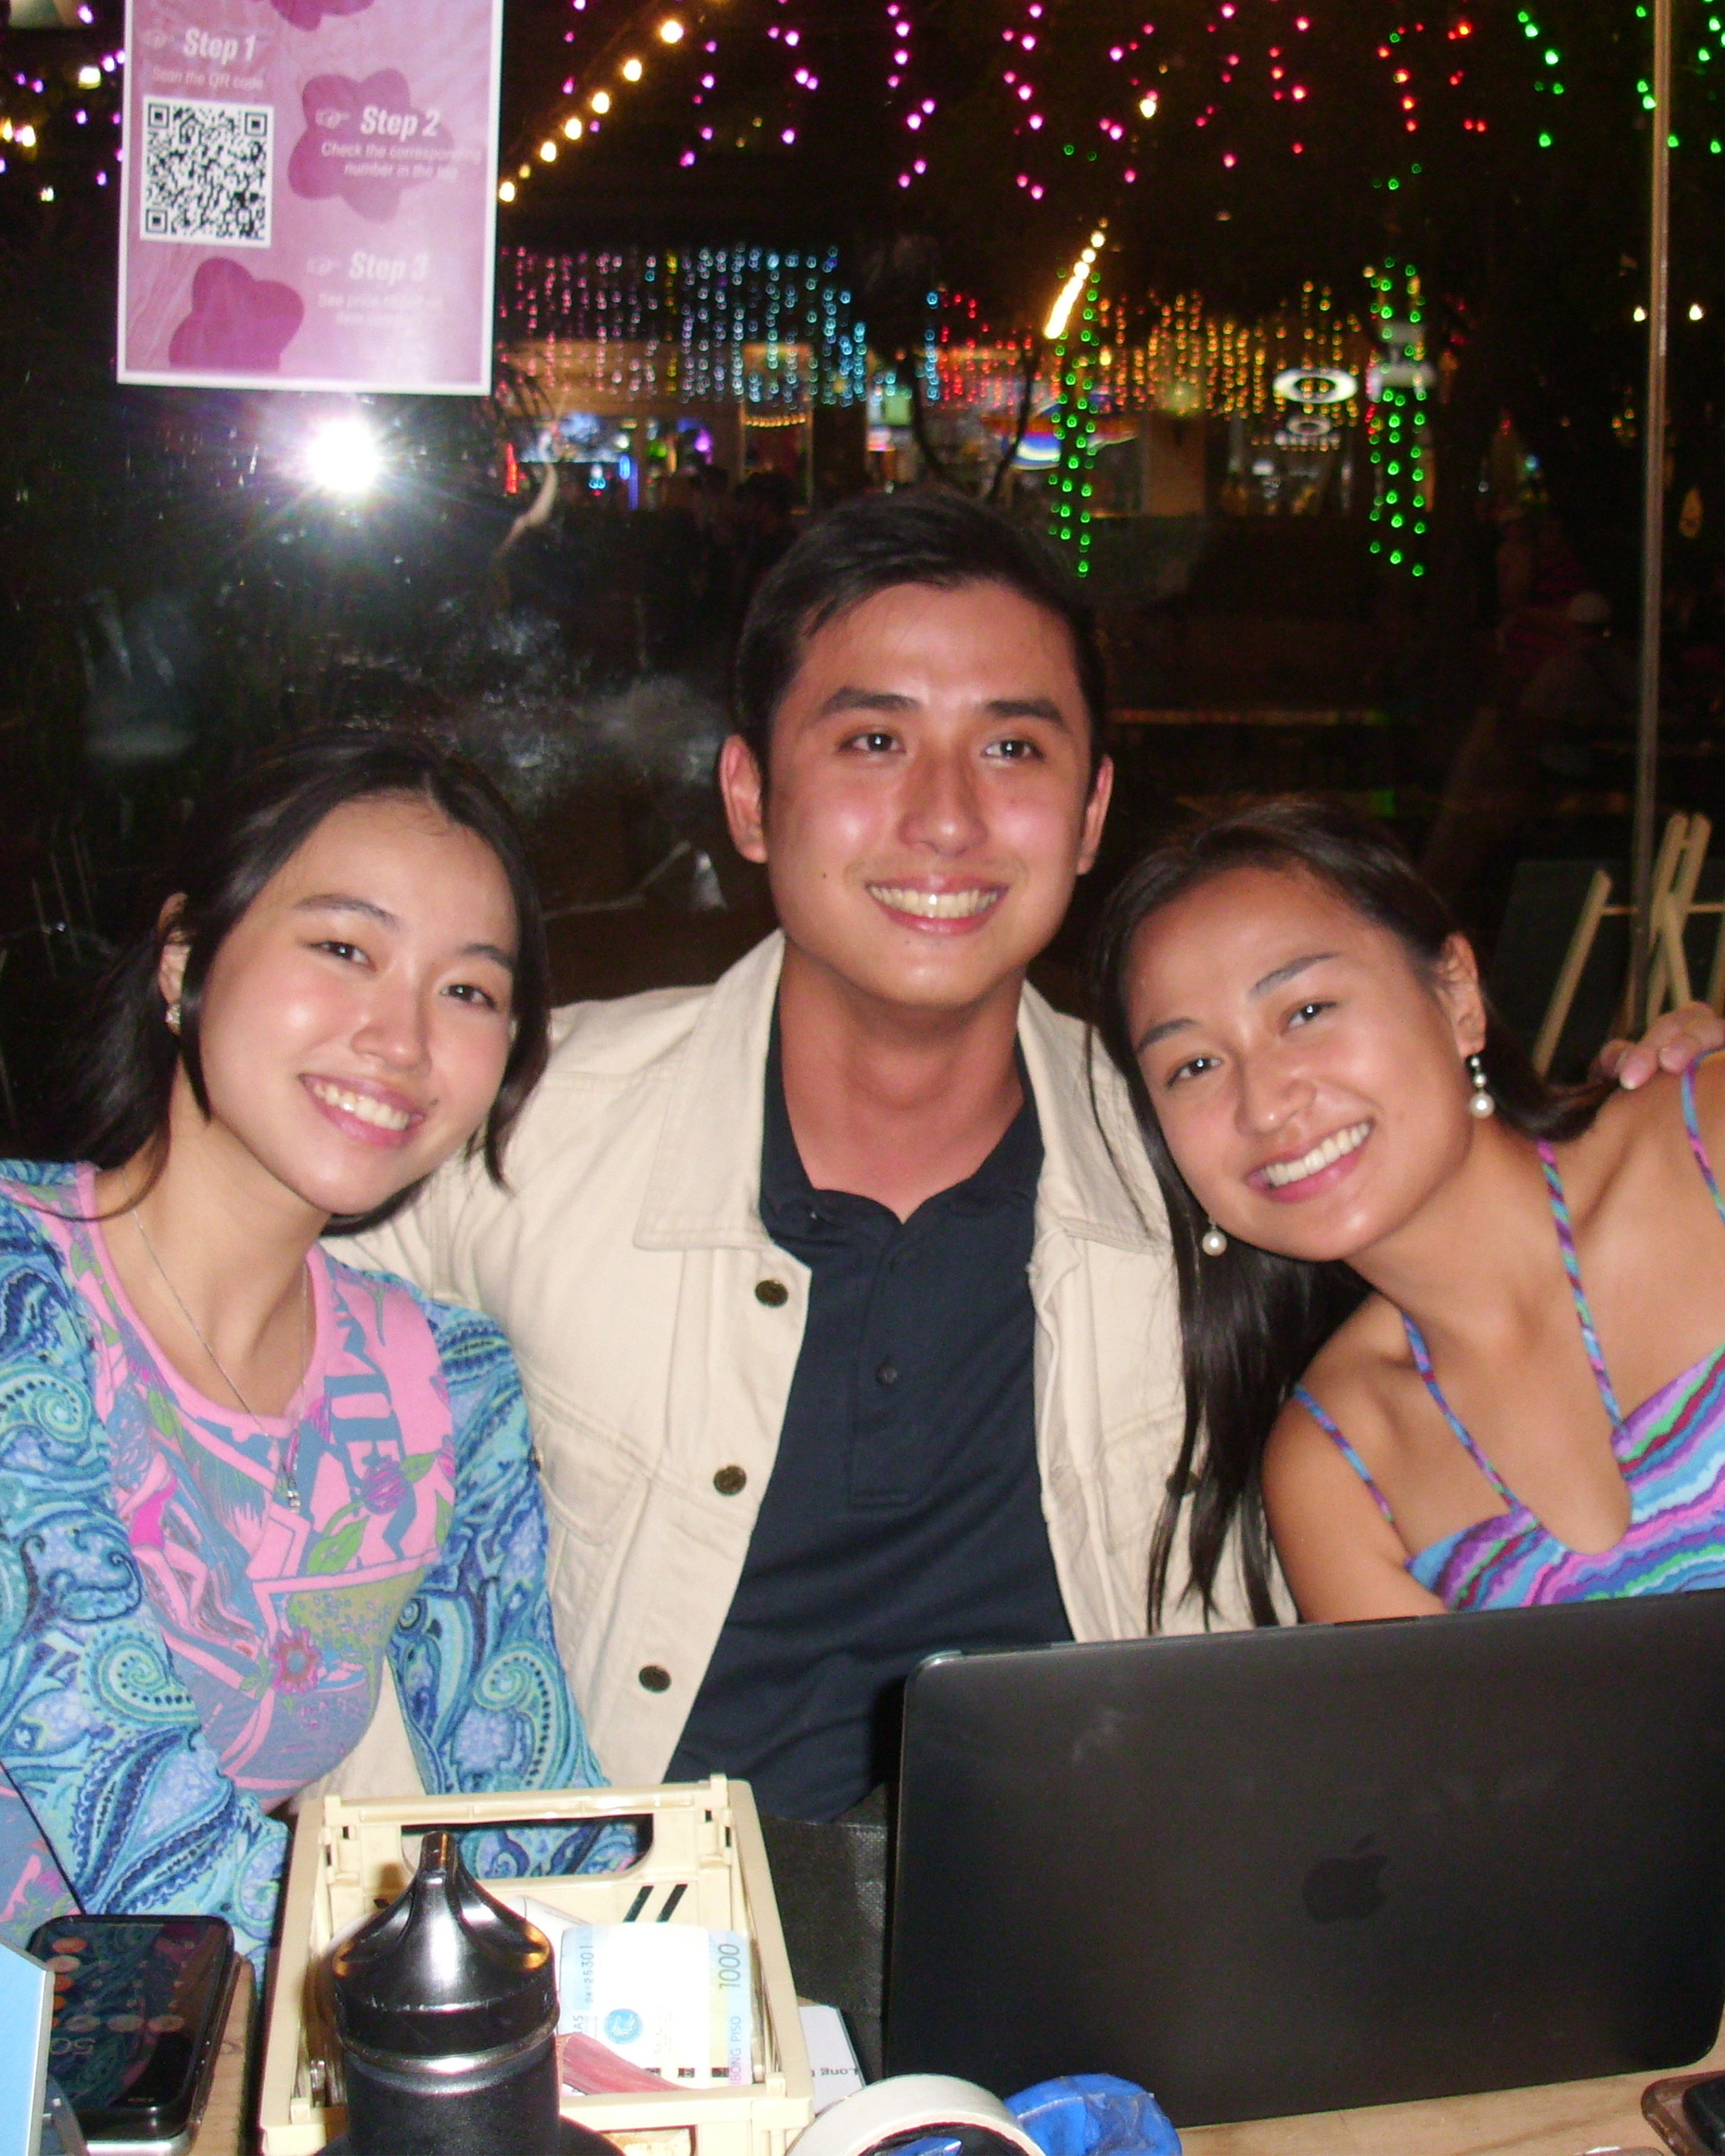 Erica Dee, Ged Poe, and Nica Siy, Owners of Nirvana